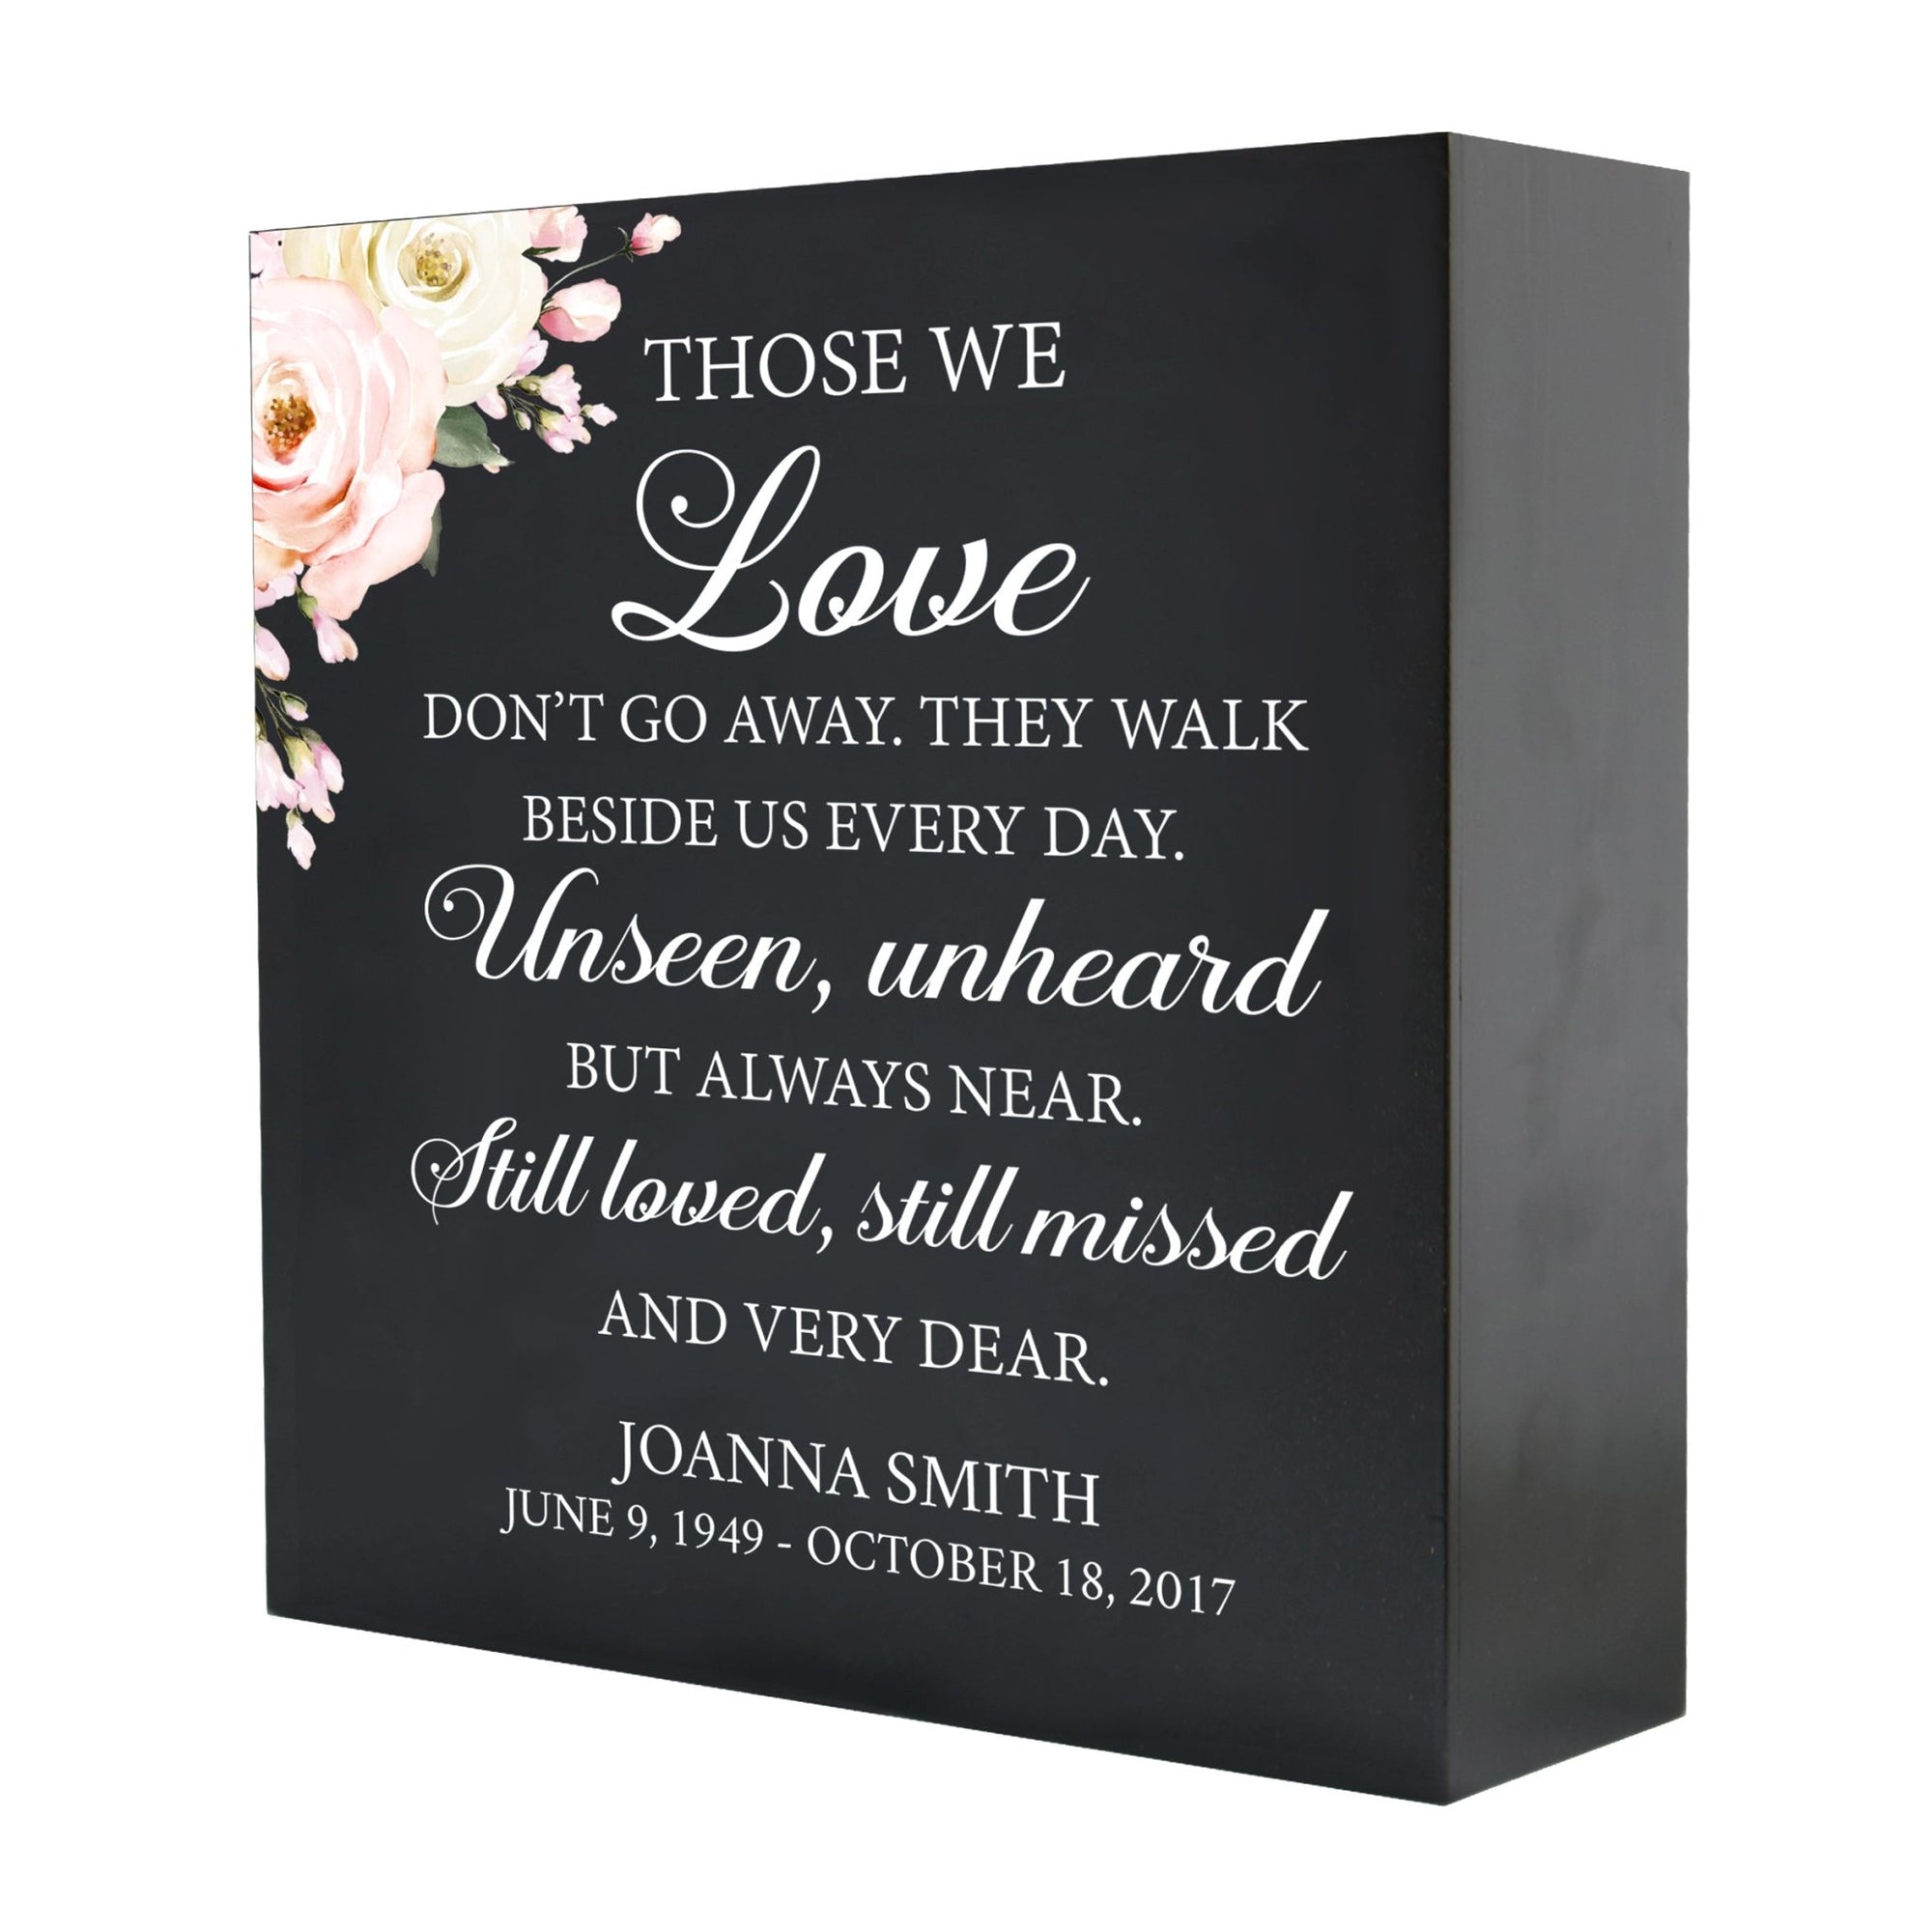 Personalized Modern Inspirational Memorial Wooden Shadow Box and Urn 10x10 holds 189 cu in of Human Ashes - Those We Love Don’t Go (Black) - LifeSong Milestones